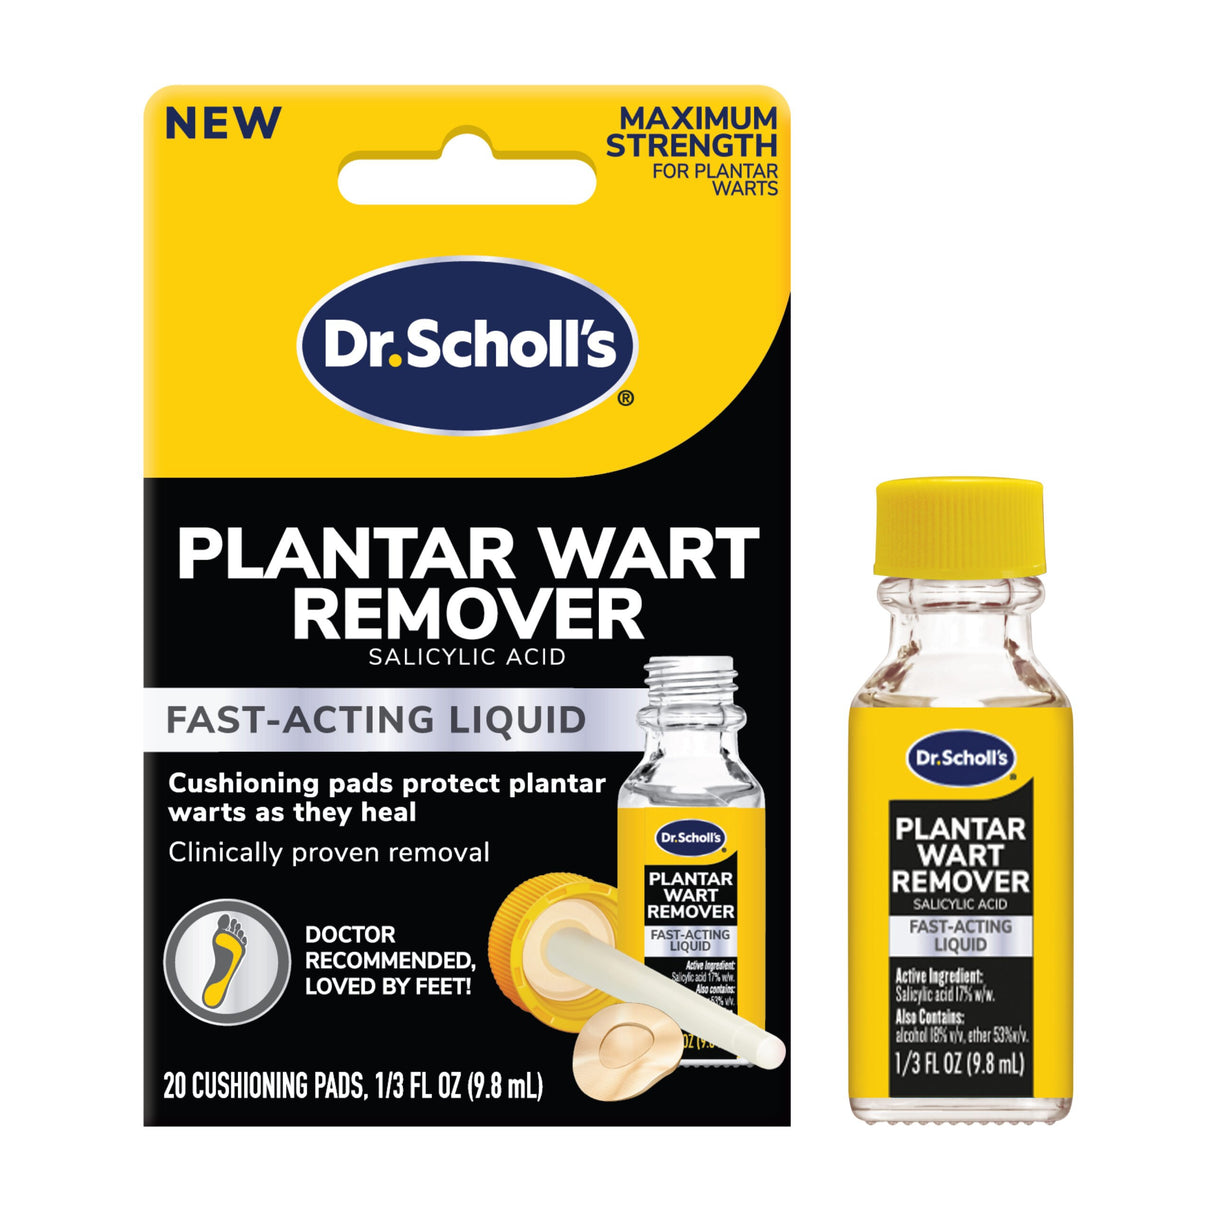 image of plantar wart remover fast acting liquid